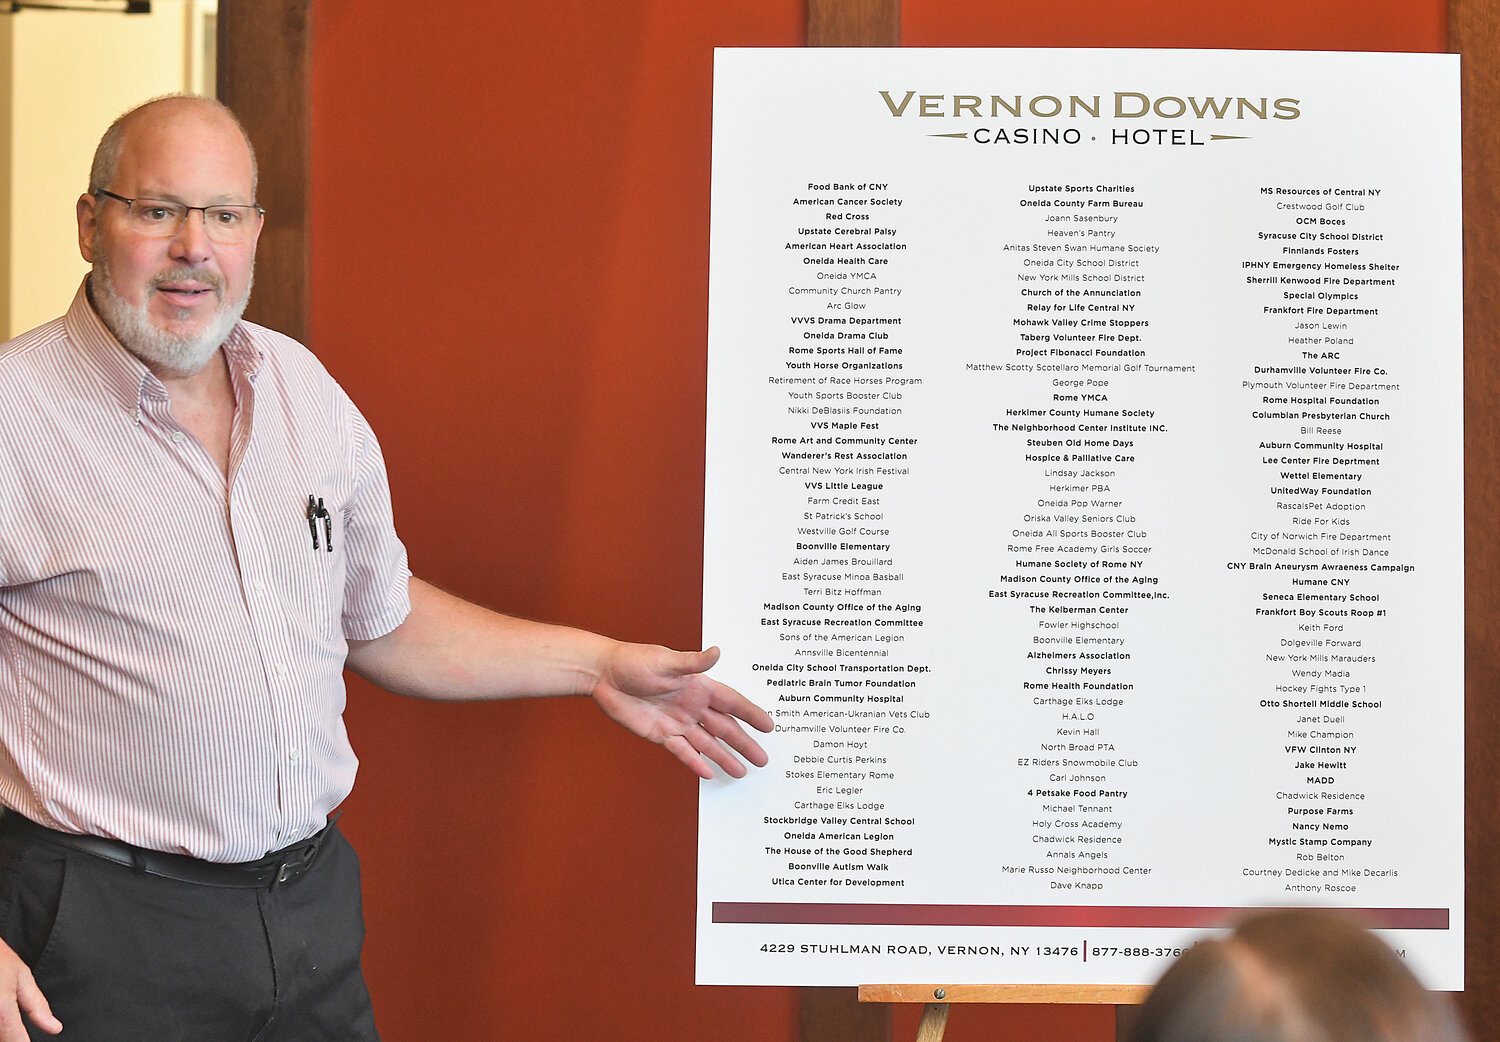 John Peters a Town of Vernon board member points out all the different organizations that Vernon Downs has contributed too during a press conference at the Racino hotel Friday, May 12.